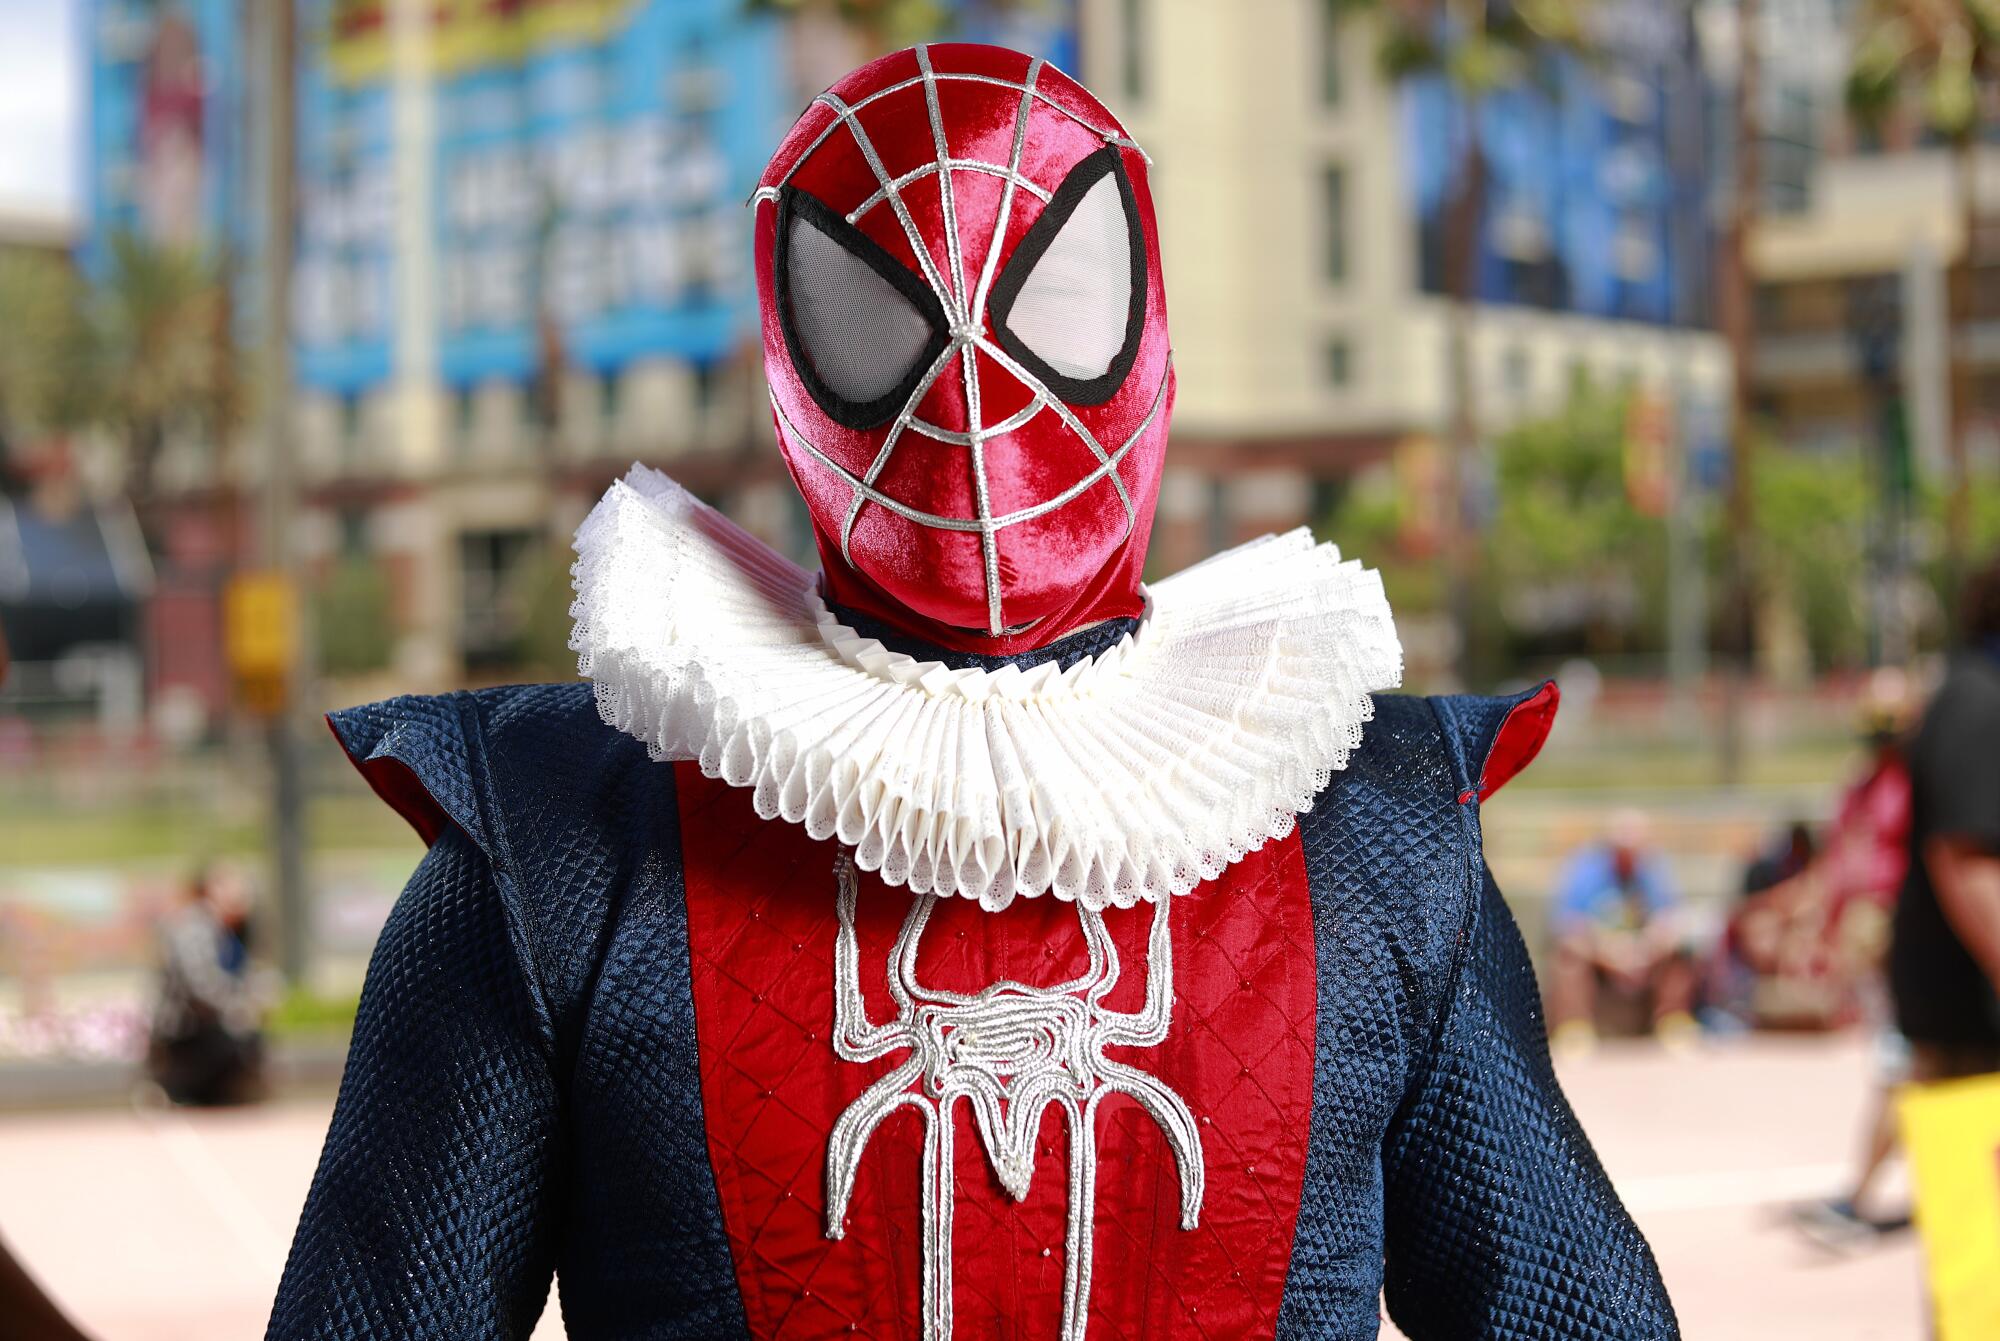 Stephen Eckert of Brooklyn dressed as Shakespearian Spider-man at Comic-Con.